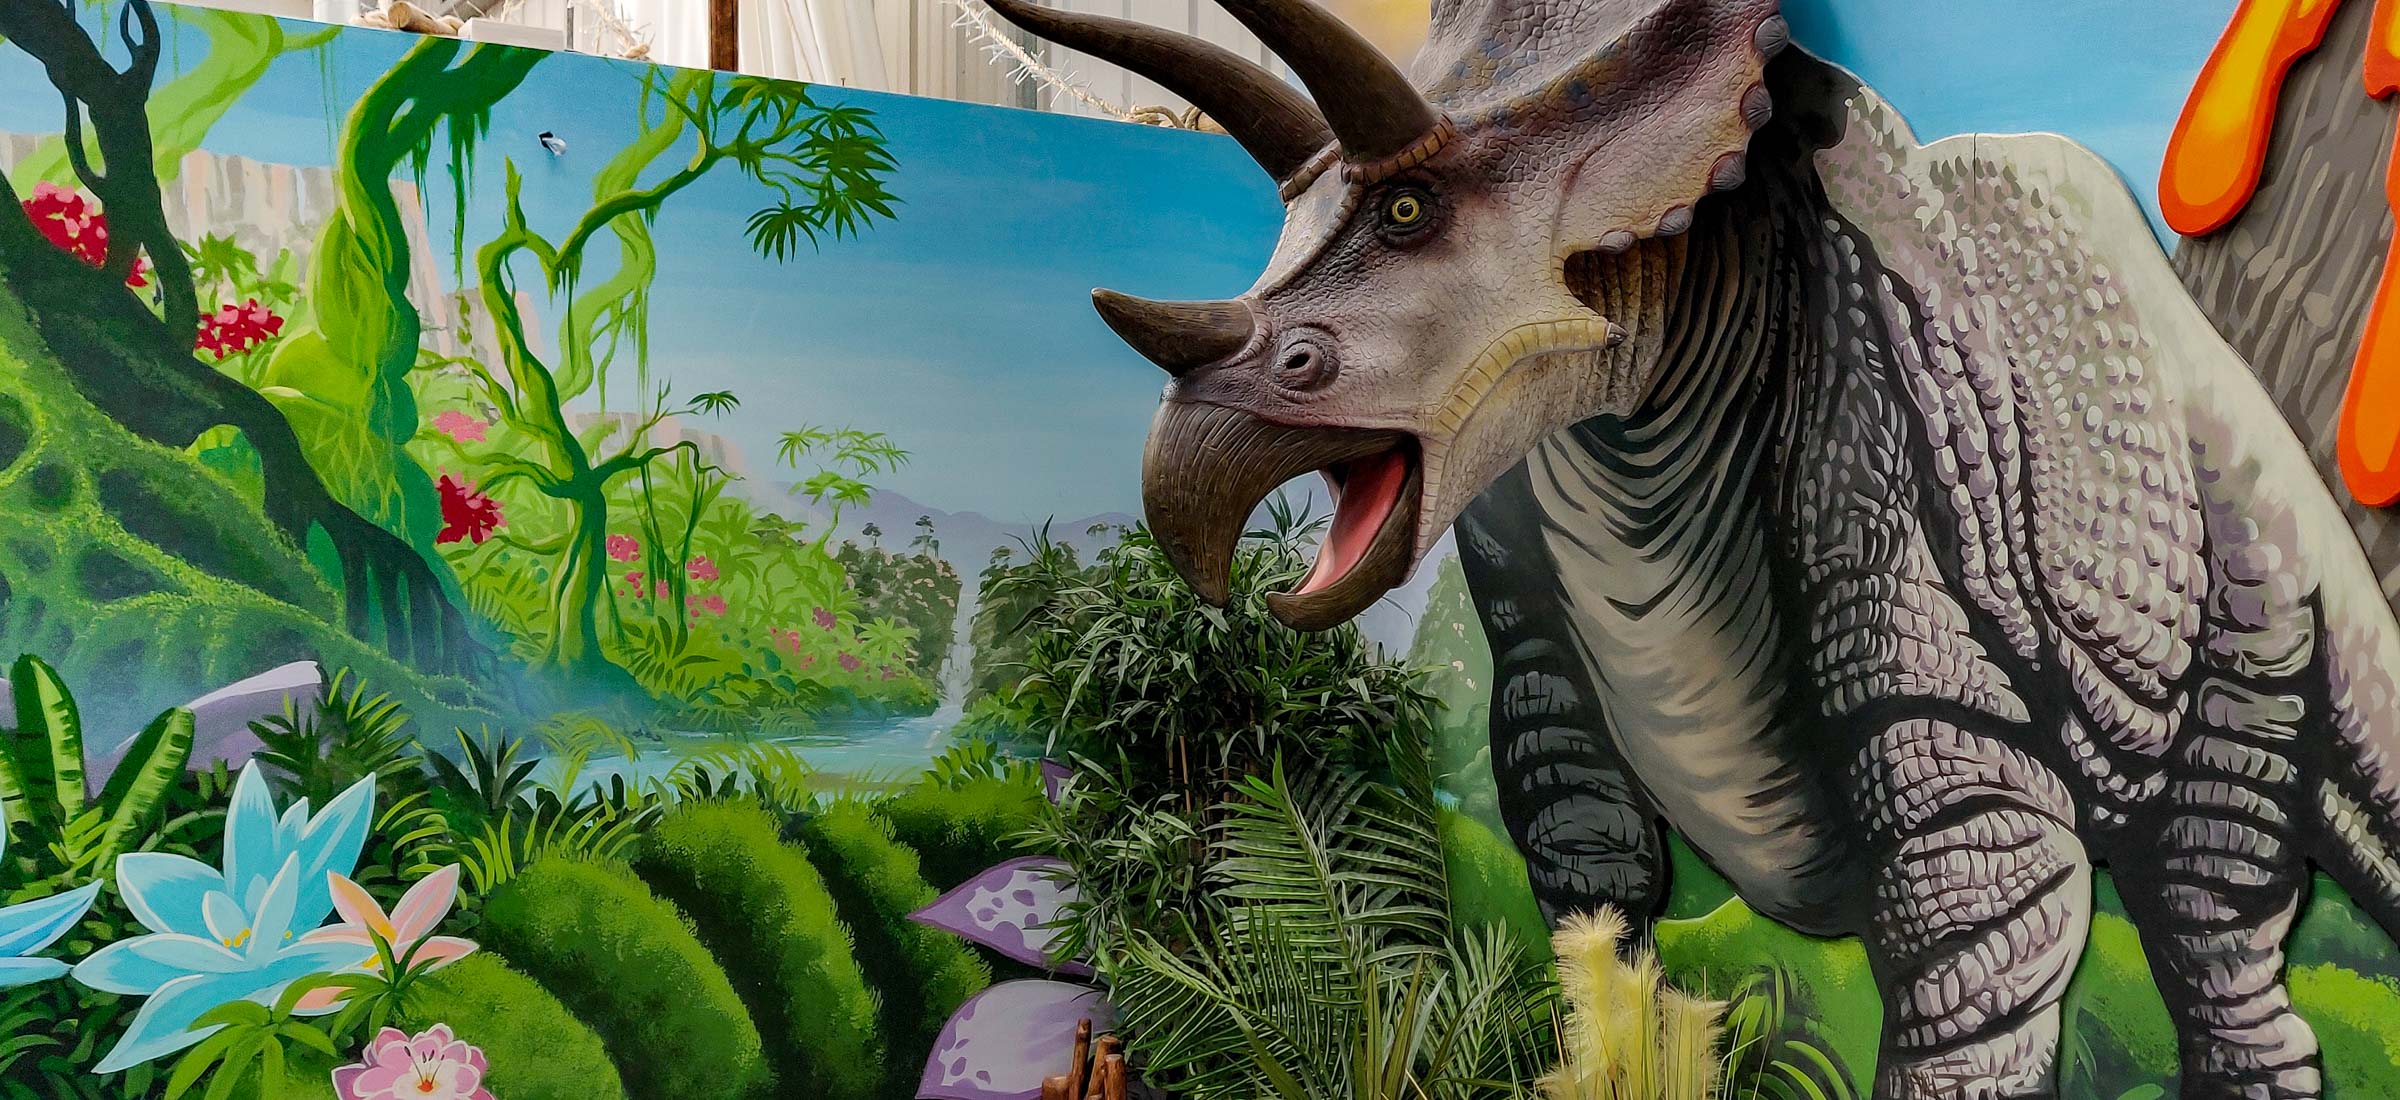 Very life-like triceratops looms out of the dinosaur mural